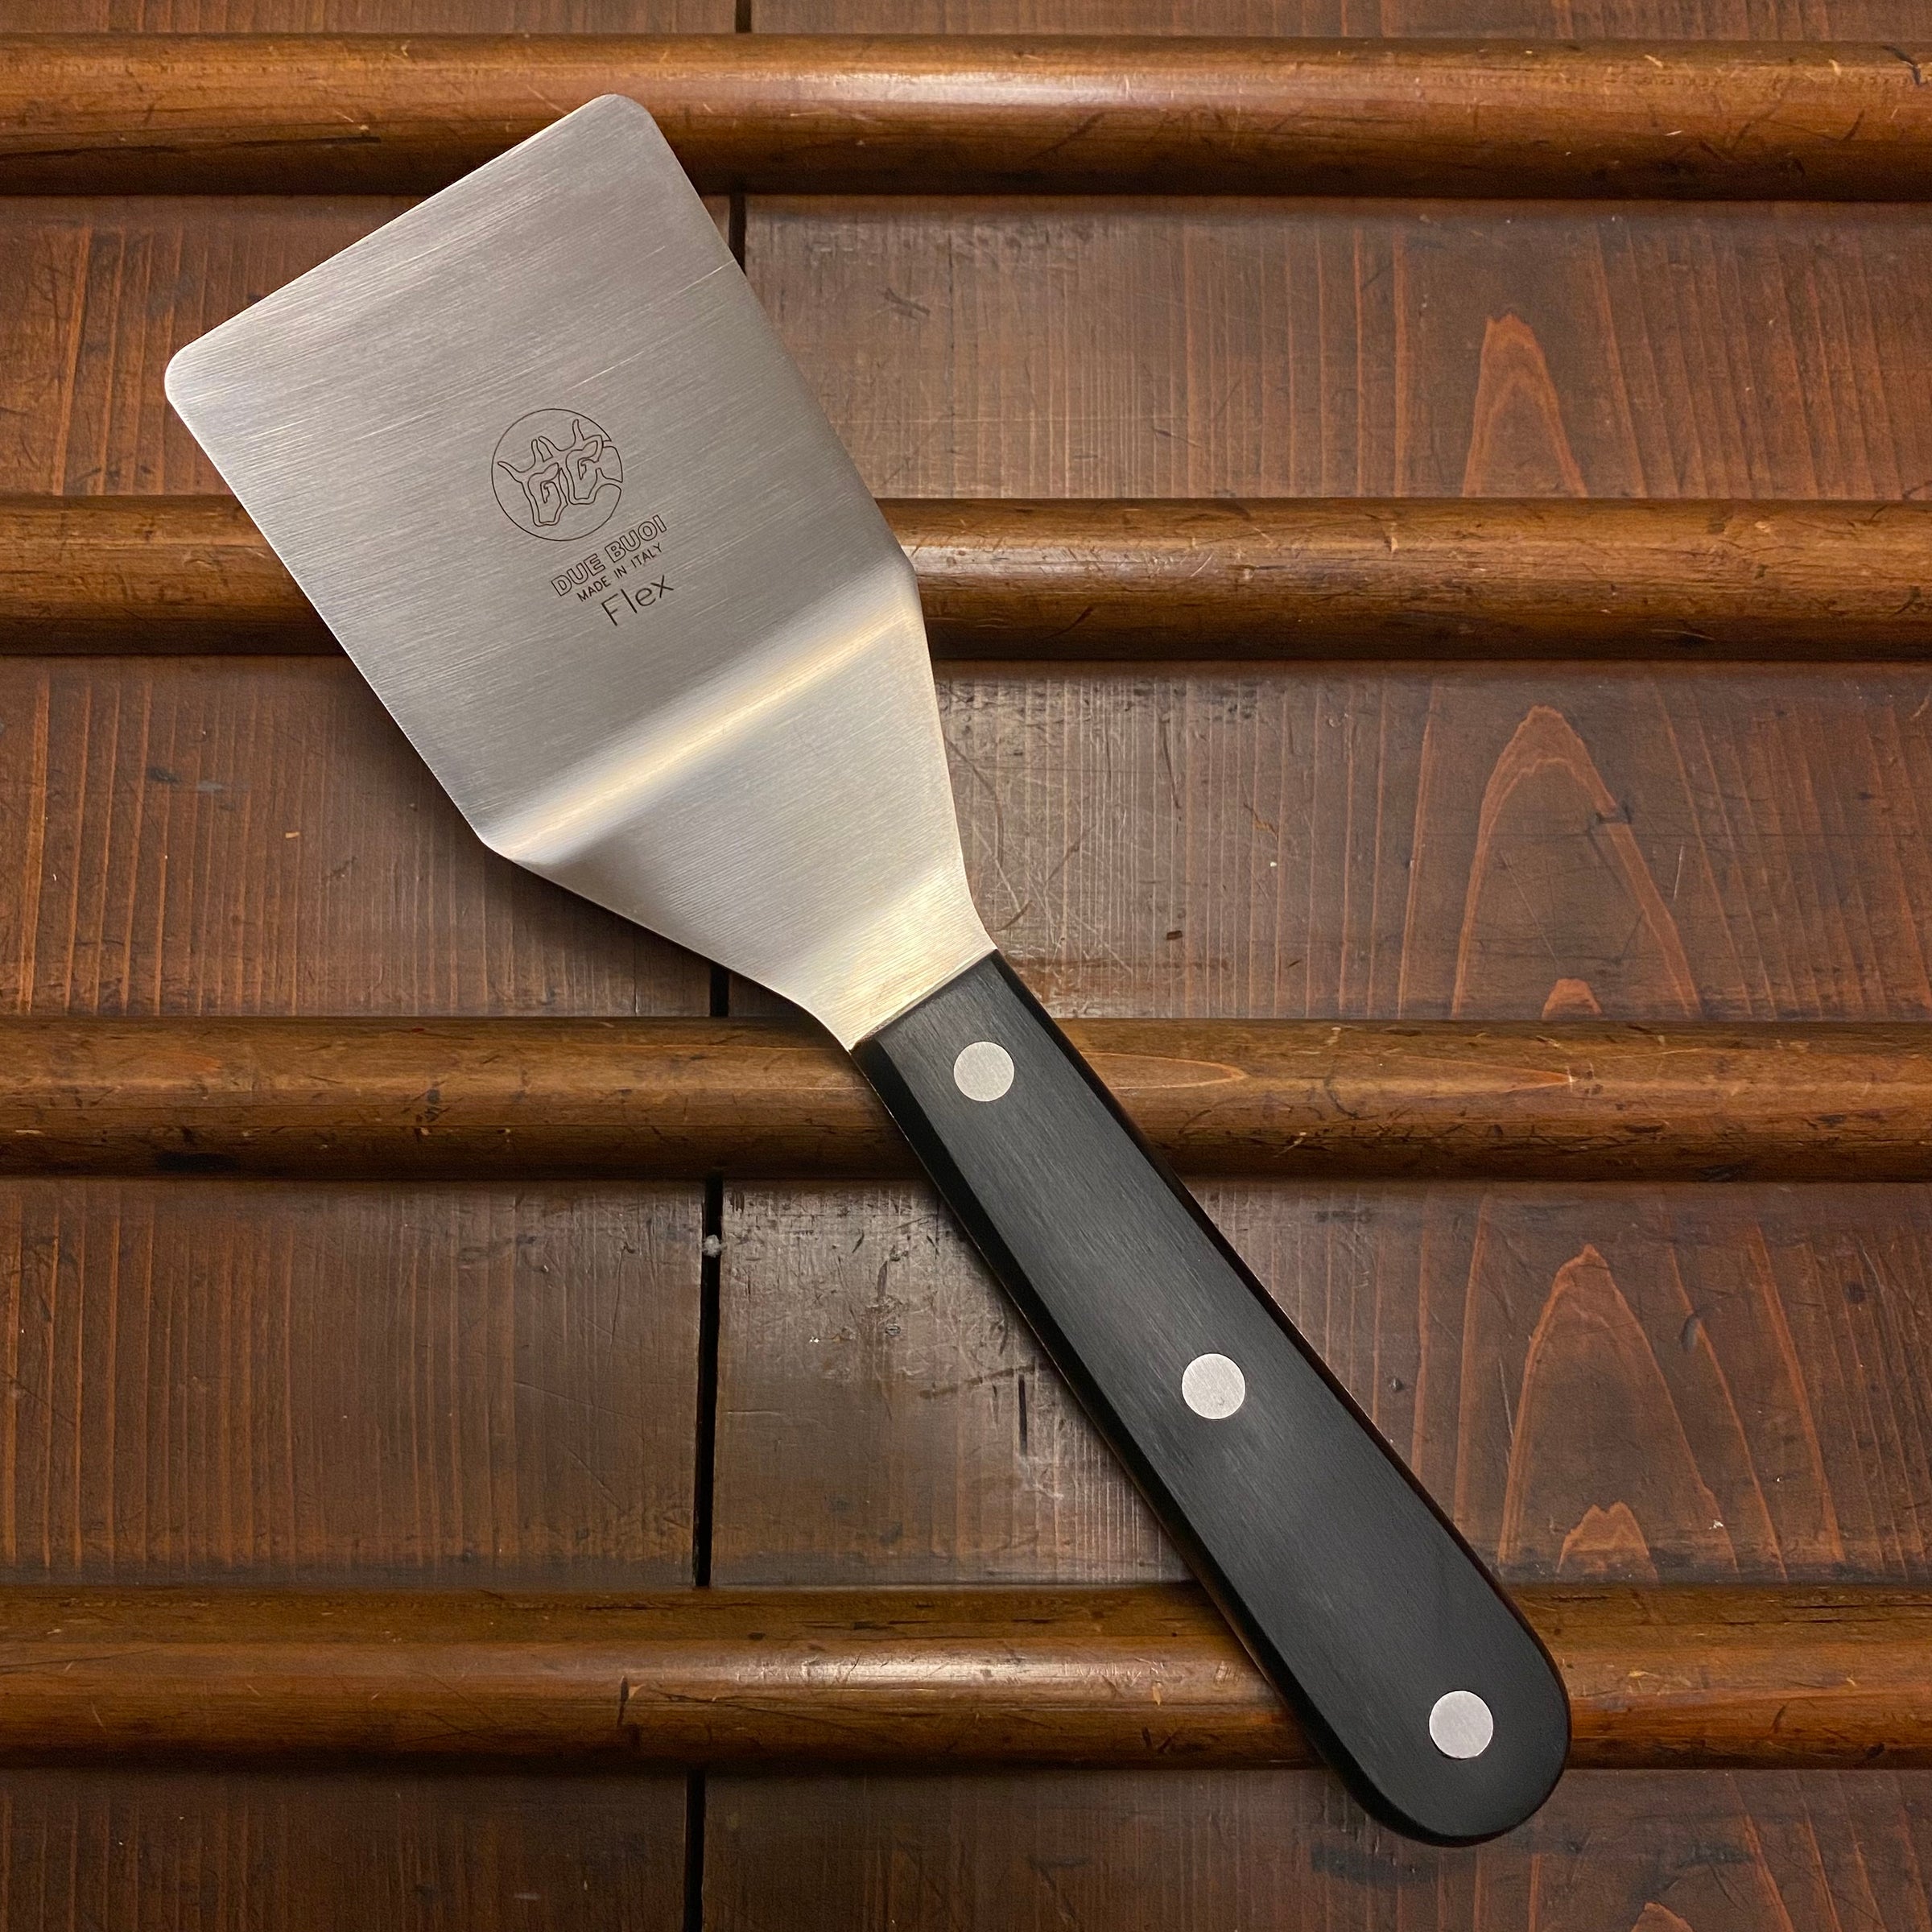 Set - Square Spatula and Knife with Wooden Handle | Due Buoi Spatula Store